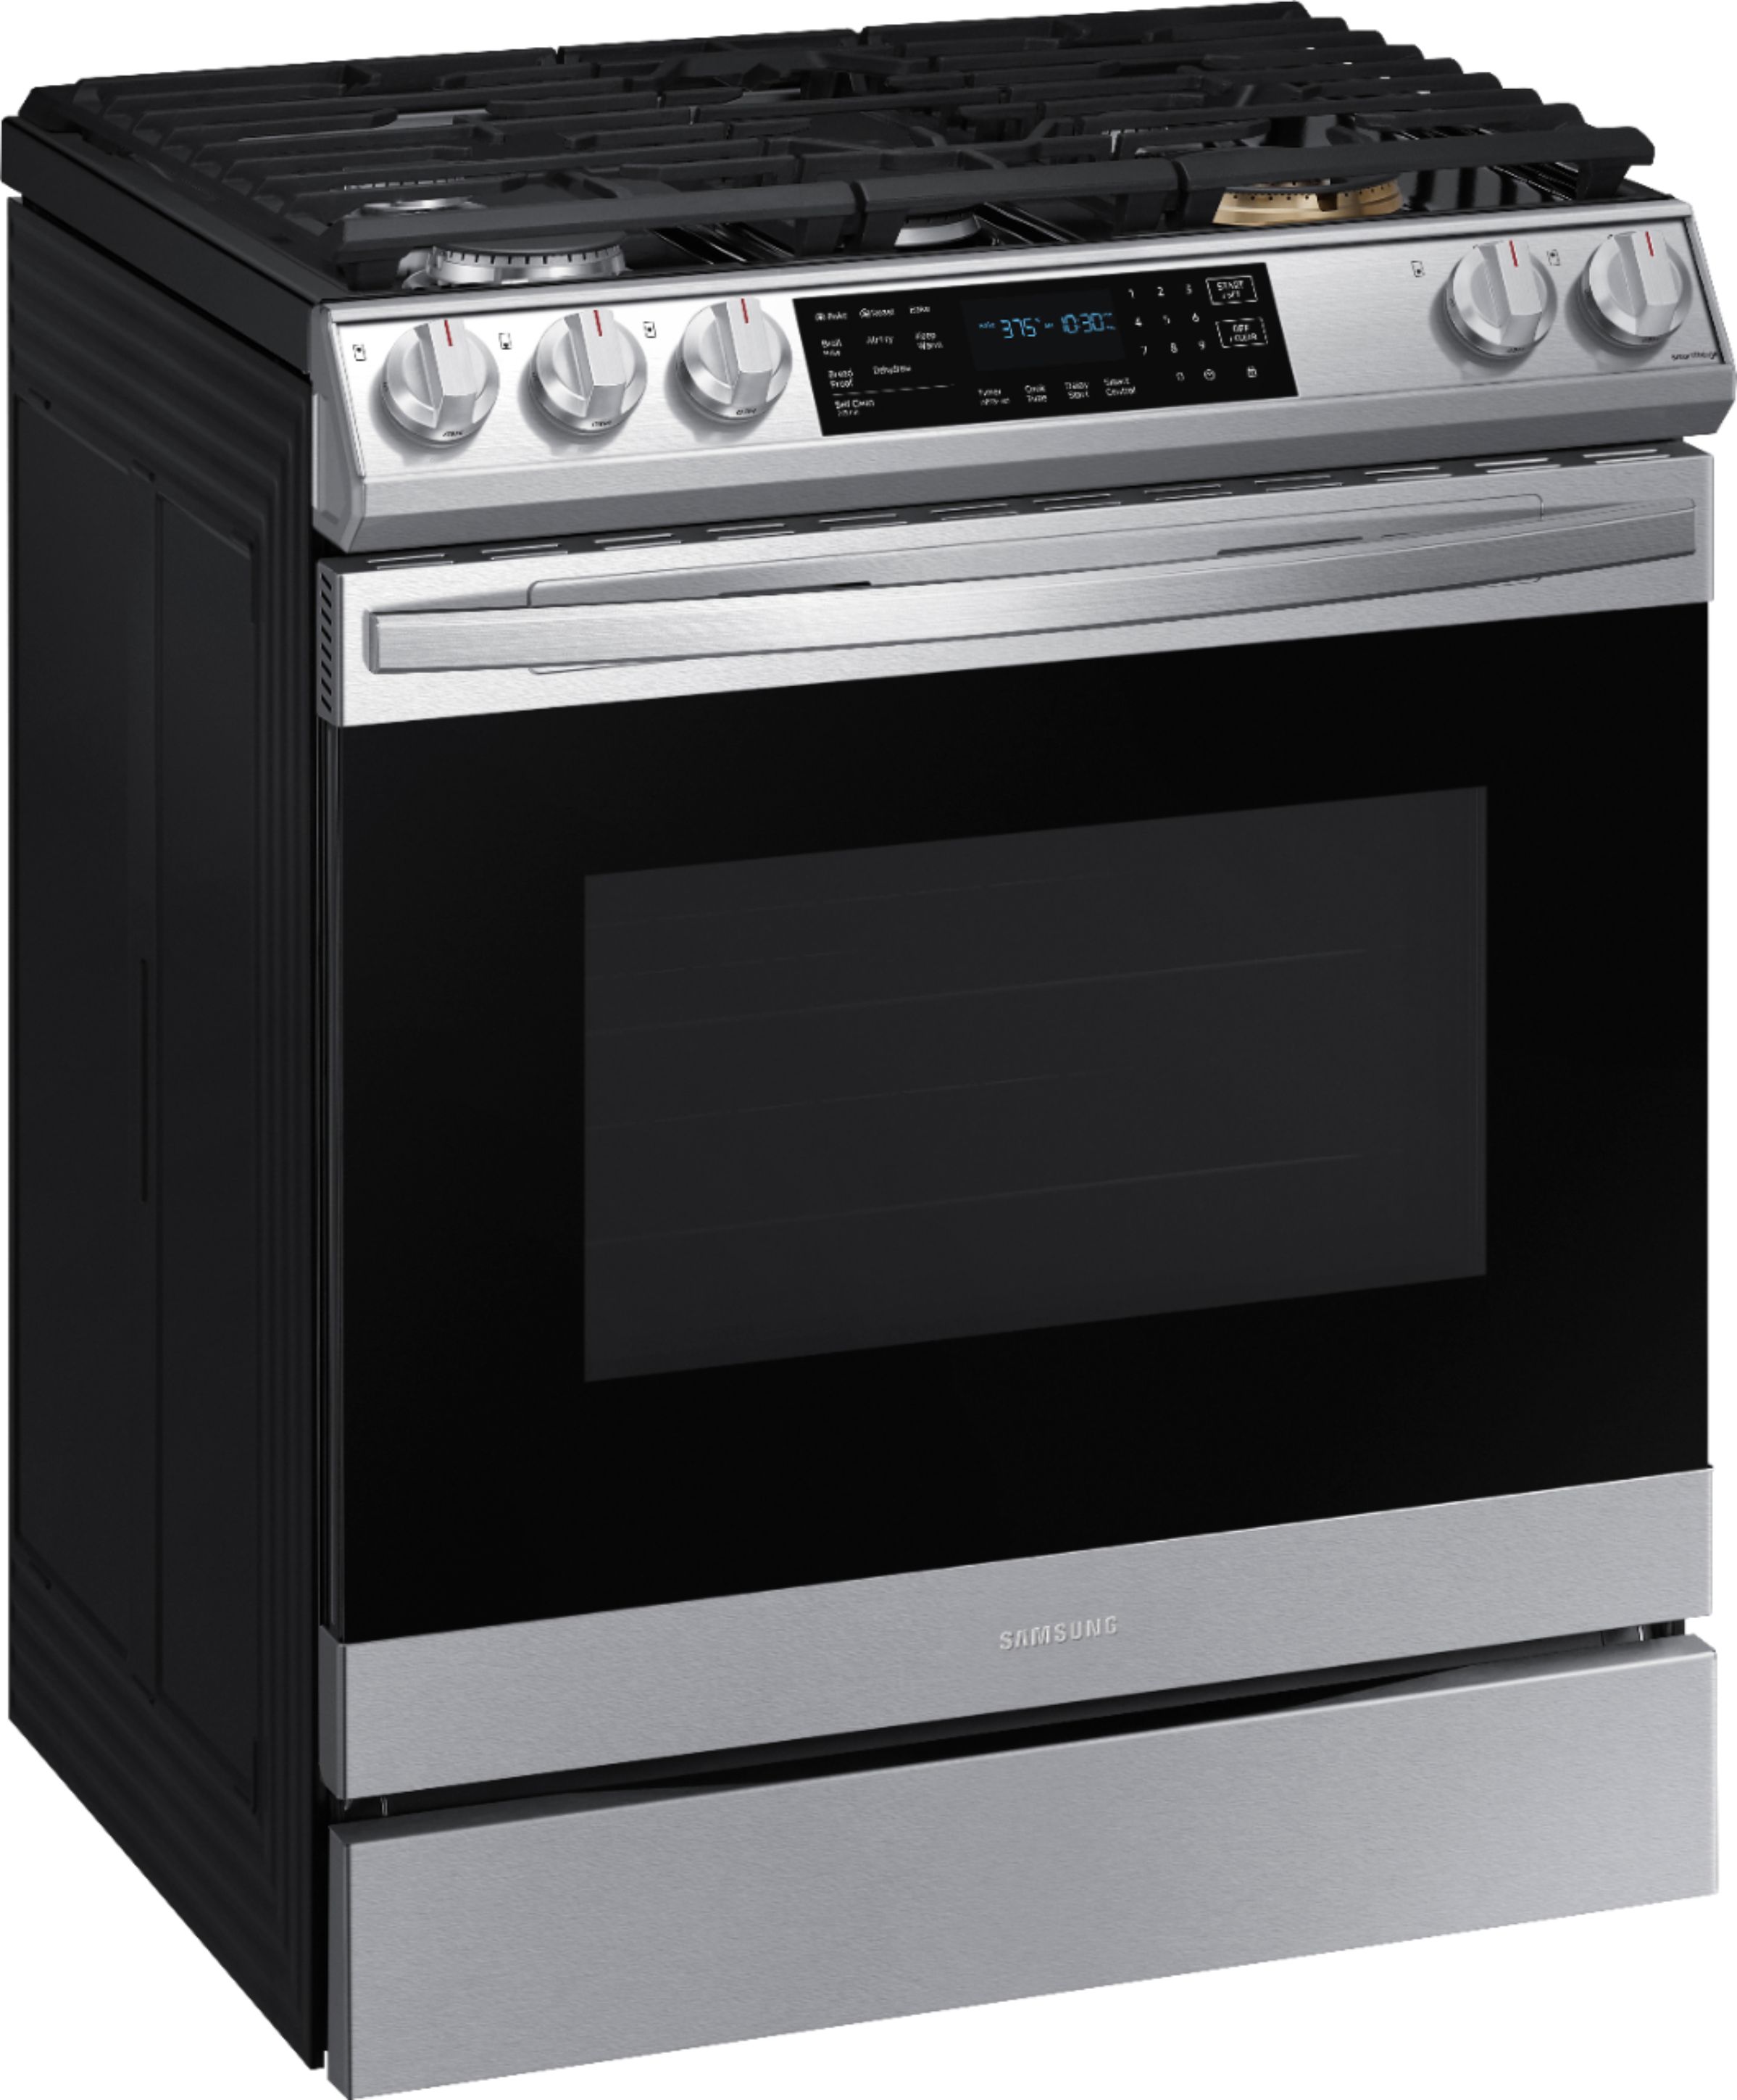 Angle View: Samsung - 6.0 cu. ft. Front Control Slide-In Gas Convection Range with Air Fry & Wi-Fi, Fingerprint Resistant - Stainless steel